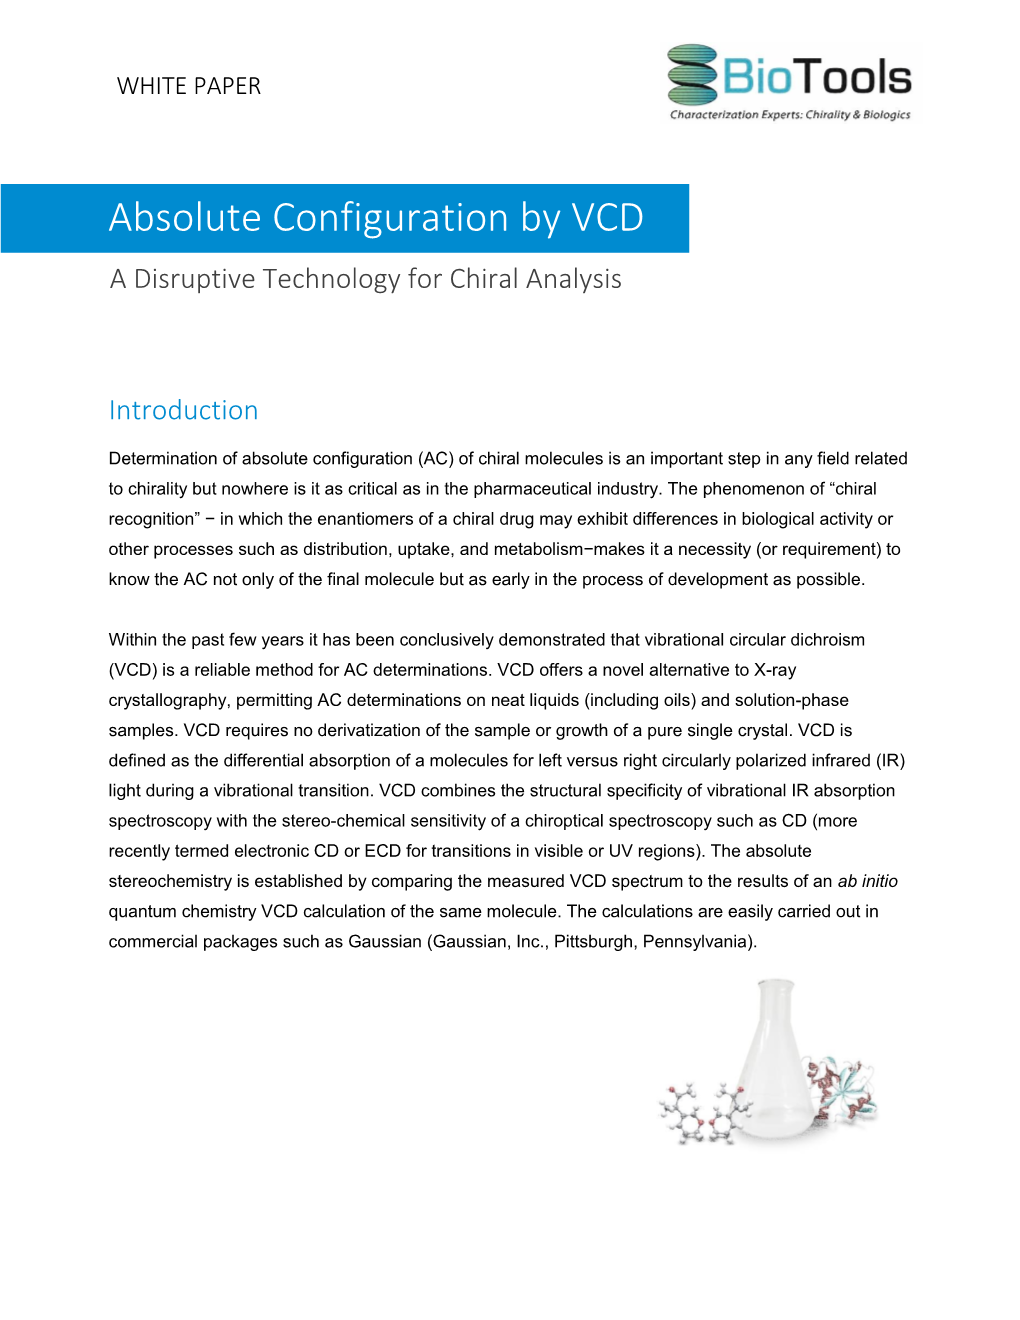 Absolute Configuration by VCD a Disruptive Technology for Chiral Analysis